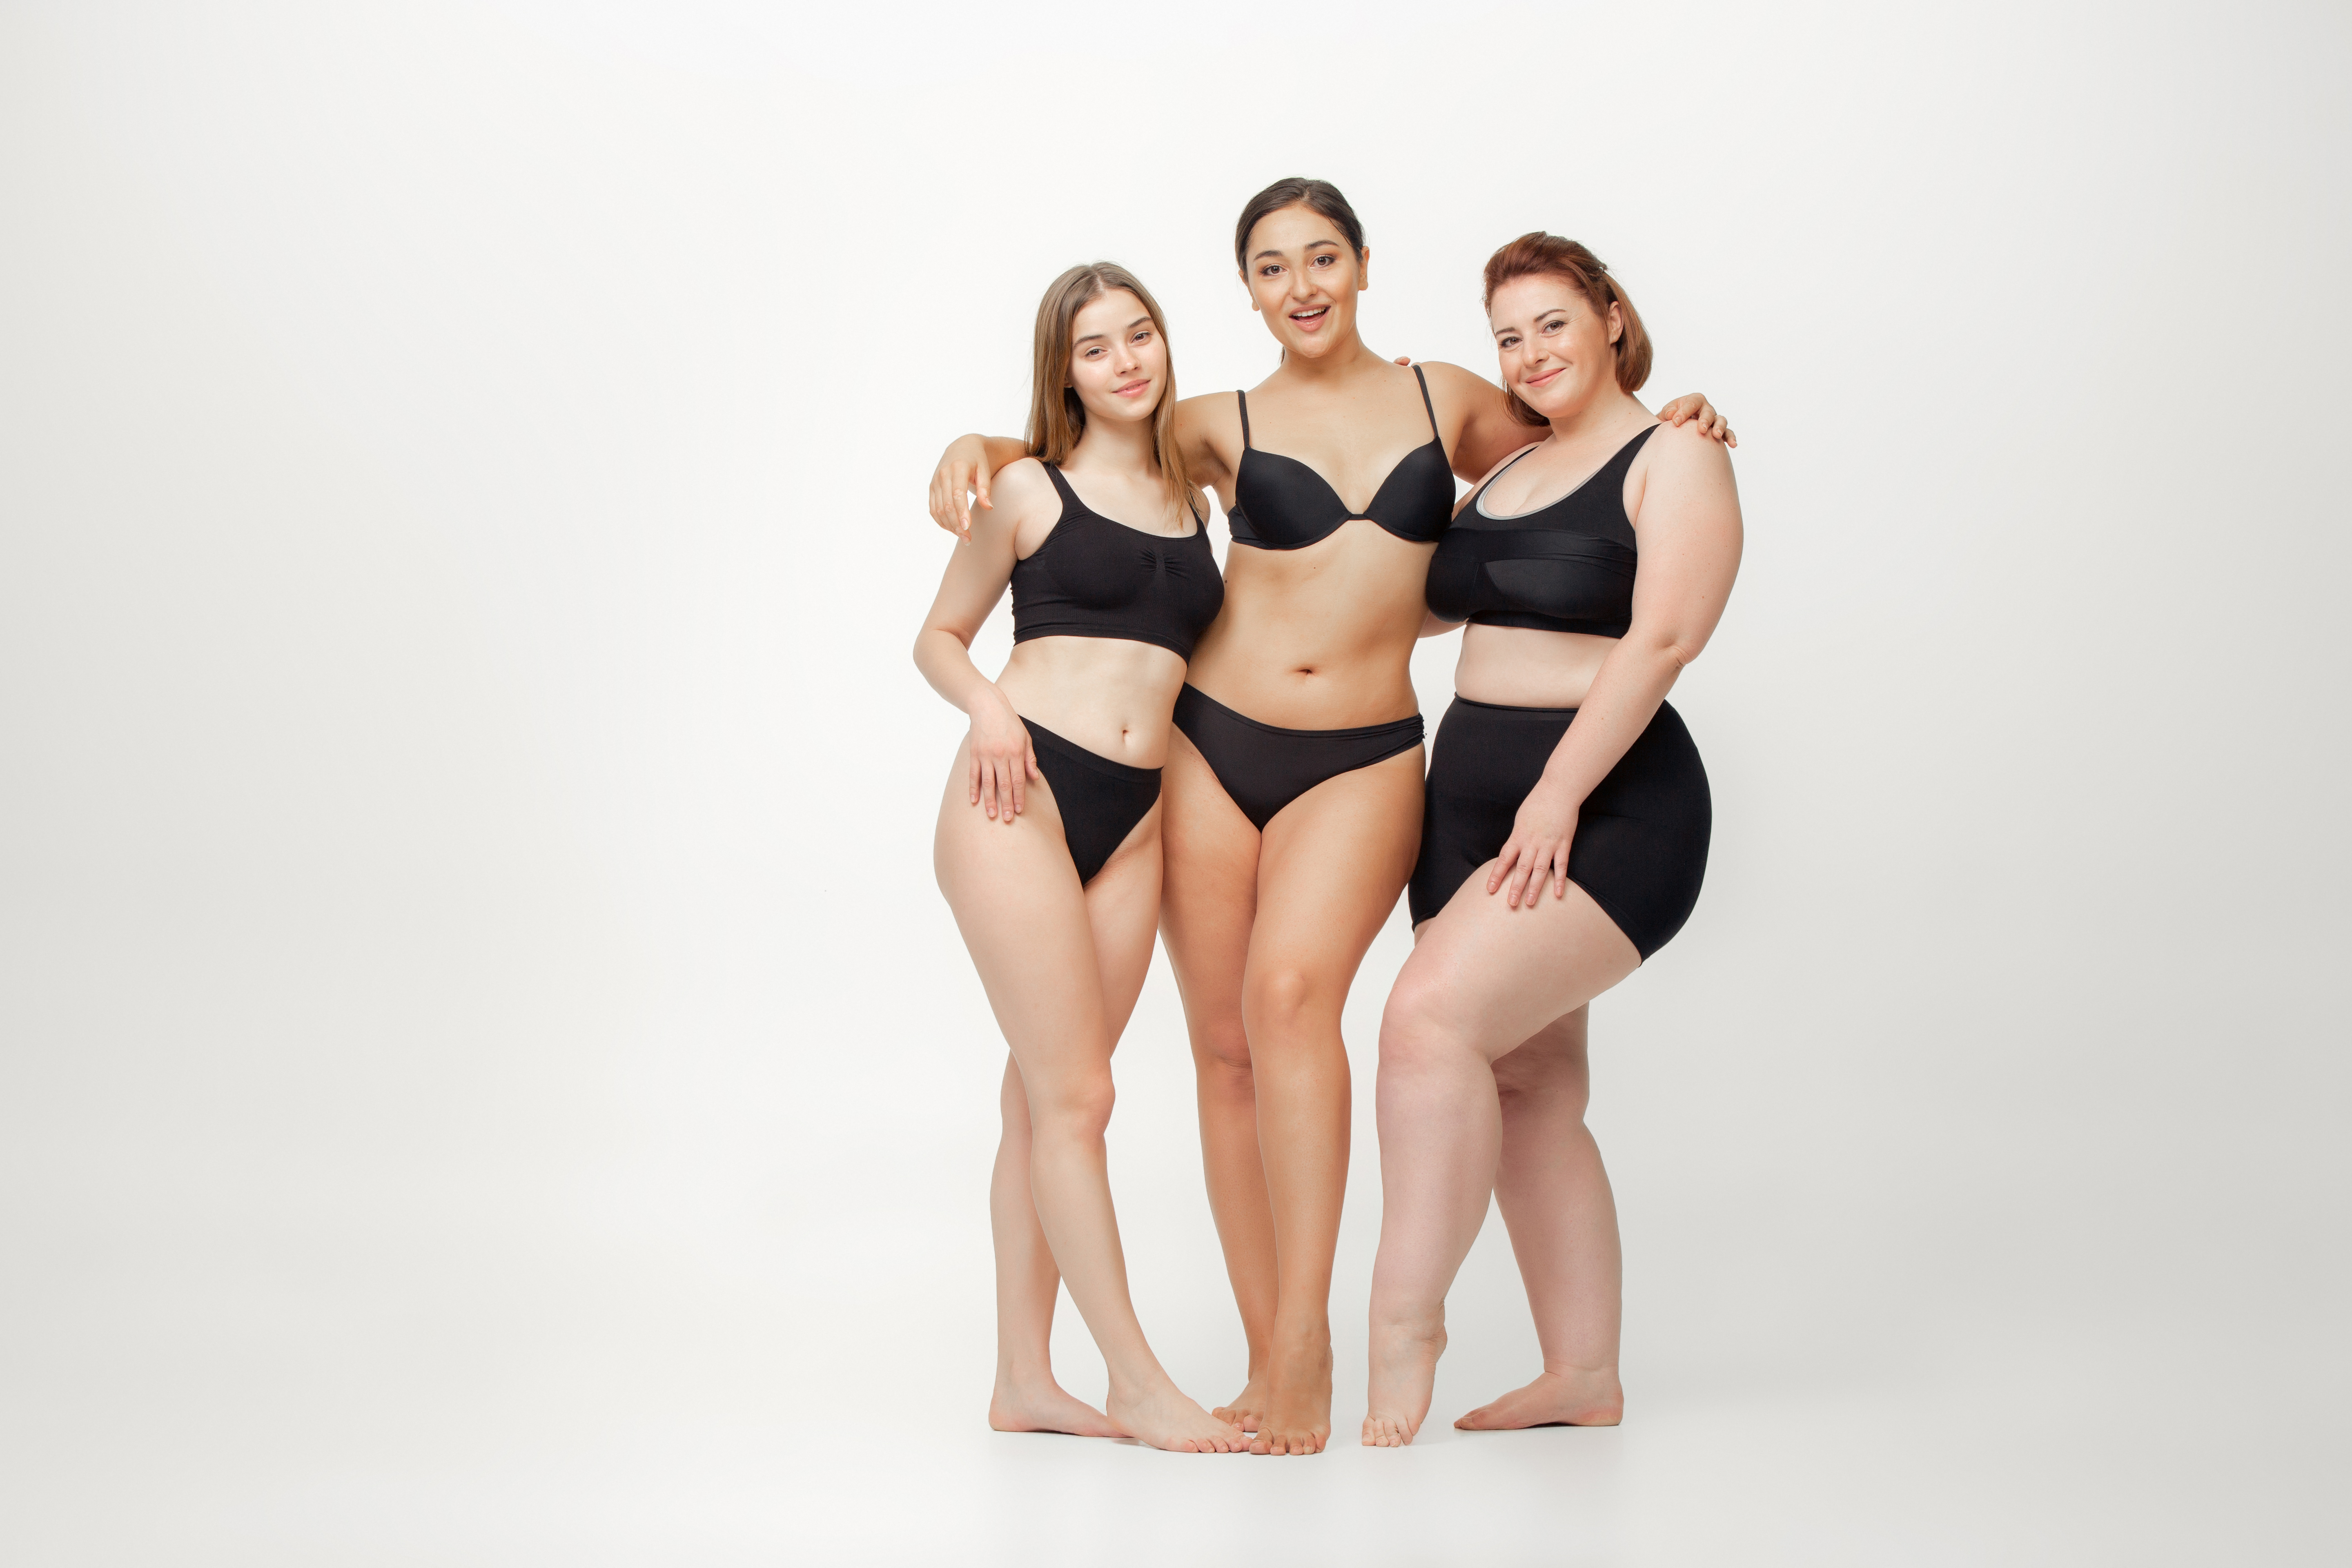 In love with myself. Portrait of beautiful young women with different shapes posing on white background. Happy female models. Concept of body positive, beauty, fashion, style, feminism. Diversity.